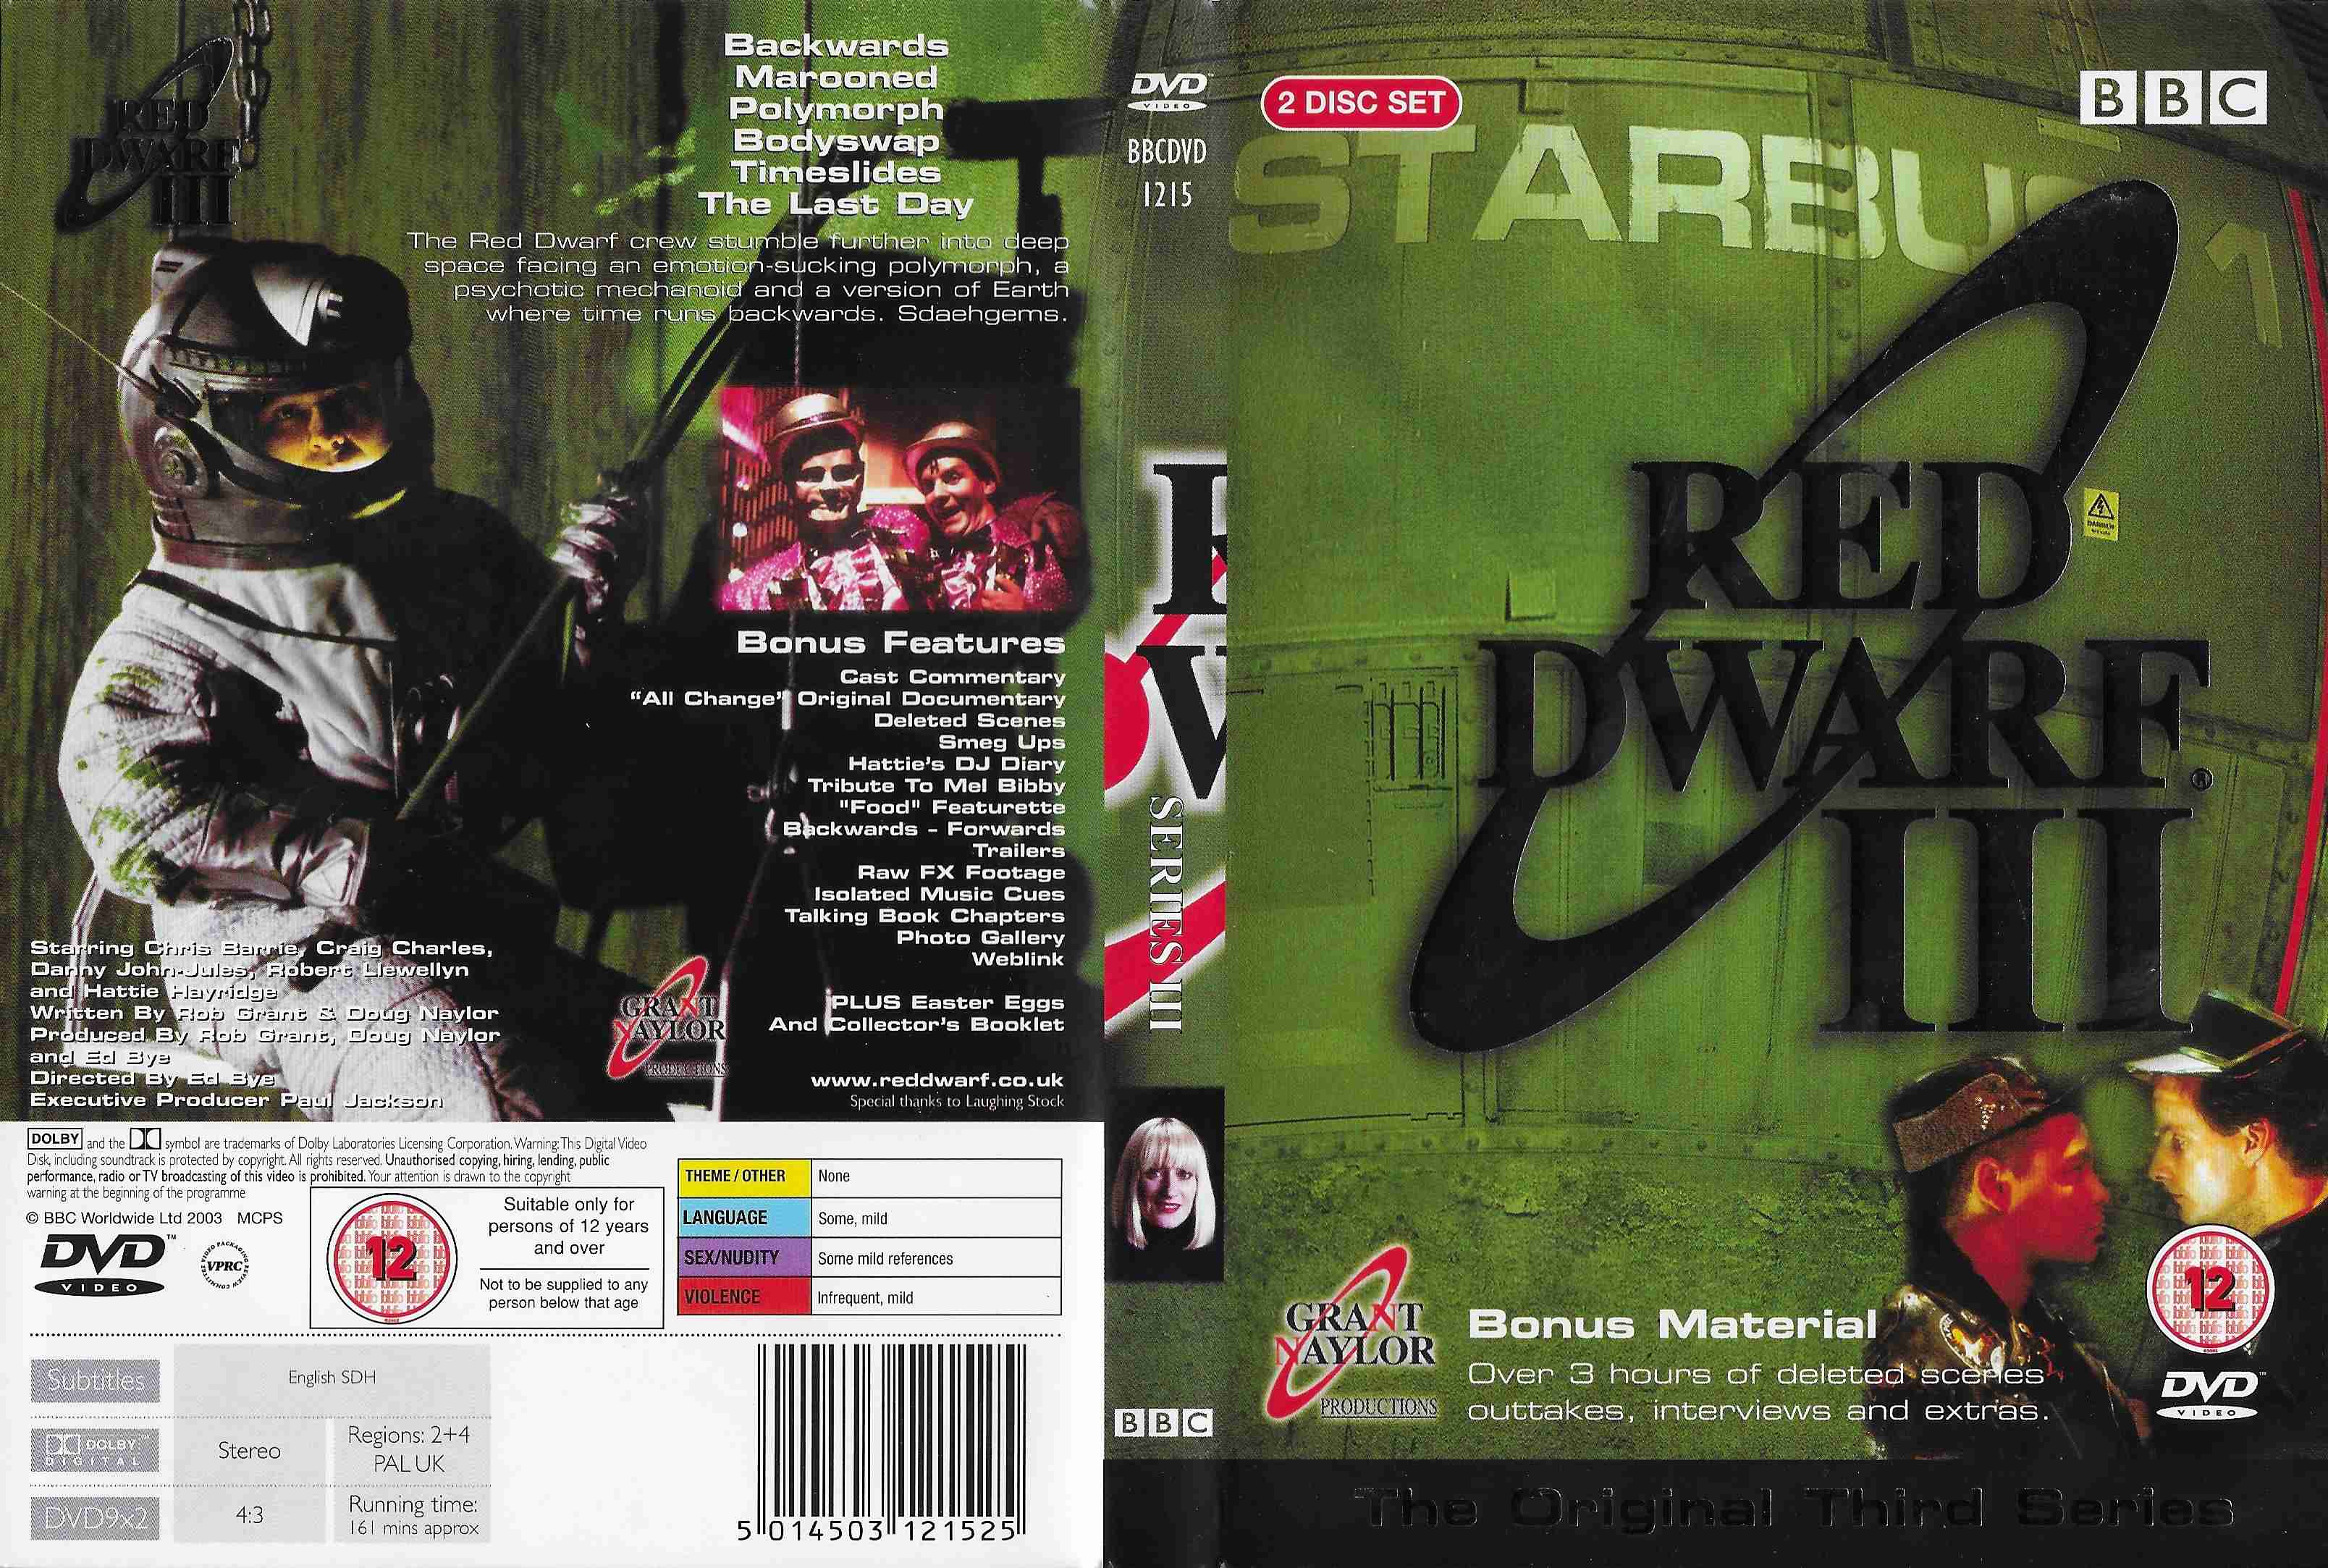 Picture of BBCDVD 1215 Red dwarf - Series III by artist Rob Grant / Doug Naylor from the BBC records and Tapes library